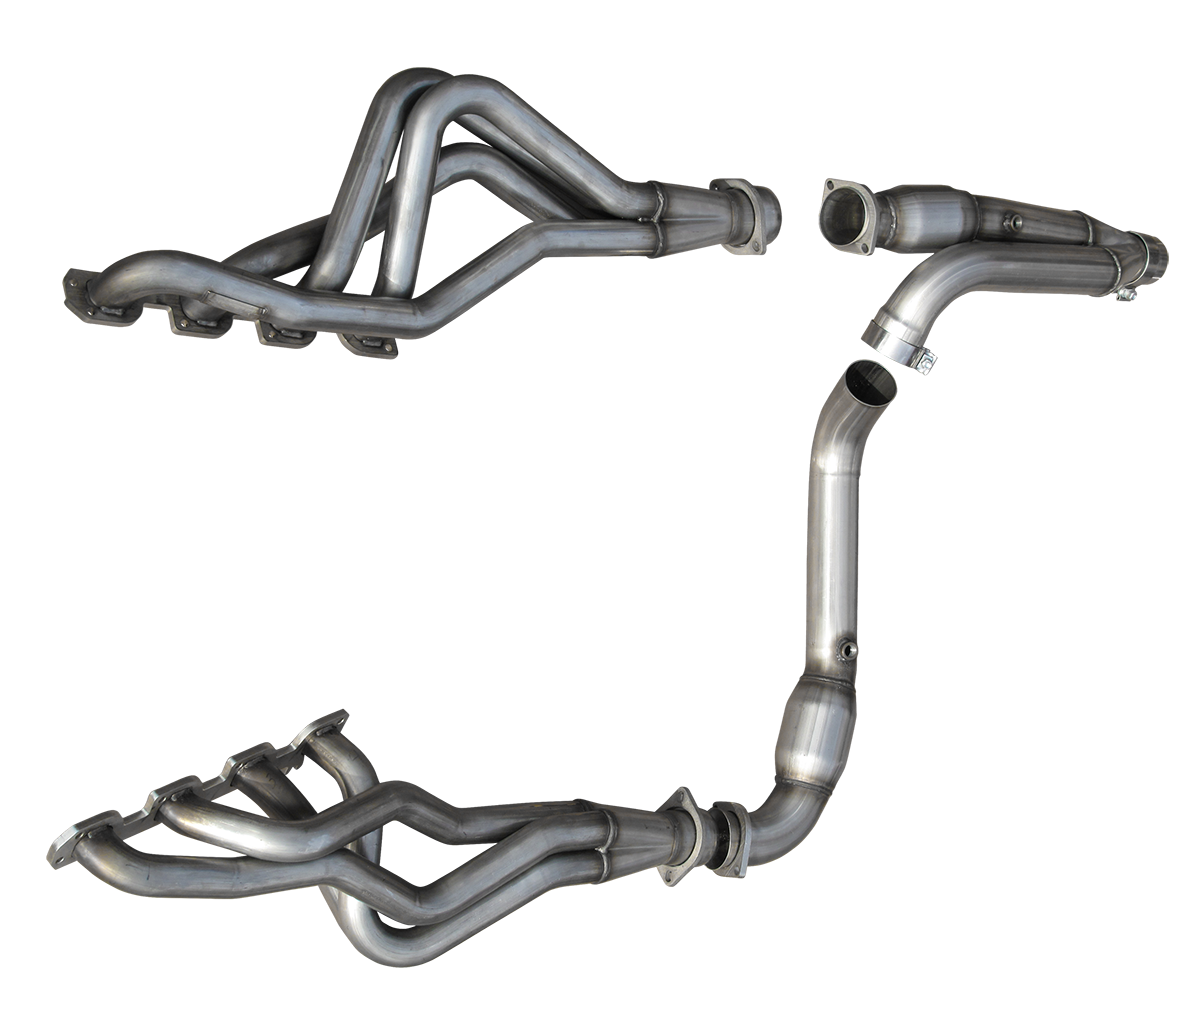 2009-2013 Dodge Ram 1500 American Racing Headers 1 7/8" x 3" Long Tube Headers w/3" Ypipe, No Cats & Pure Thunder Exhaust System